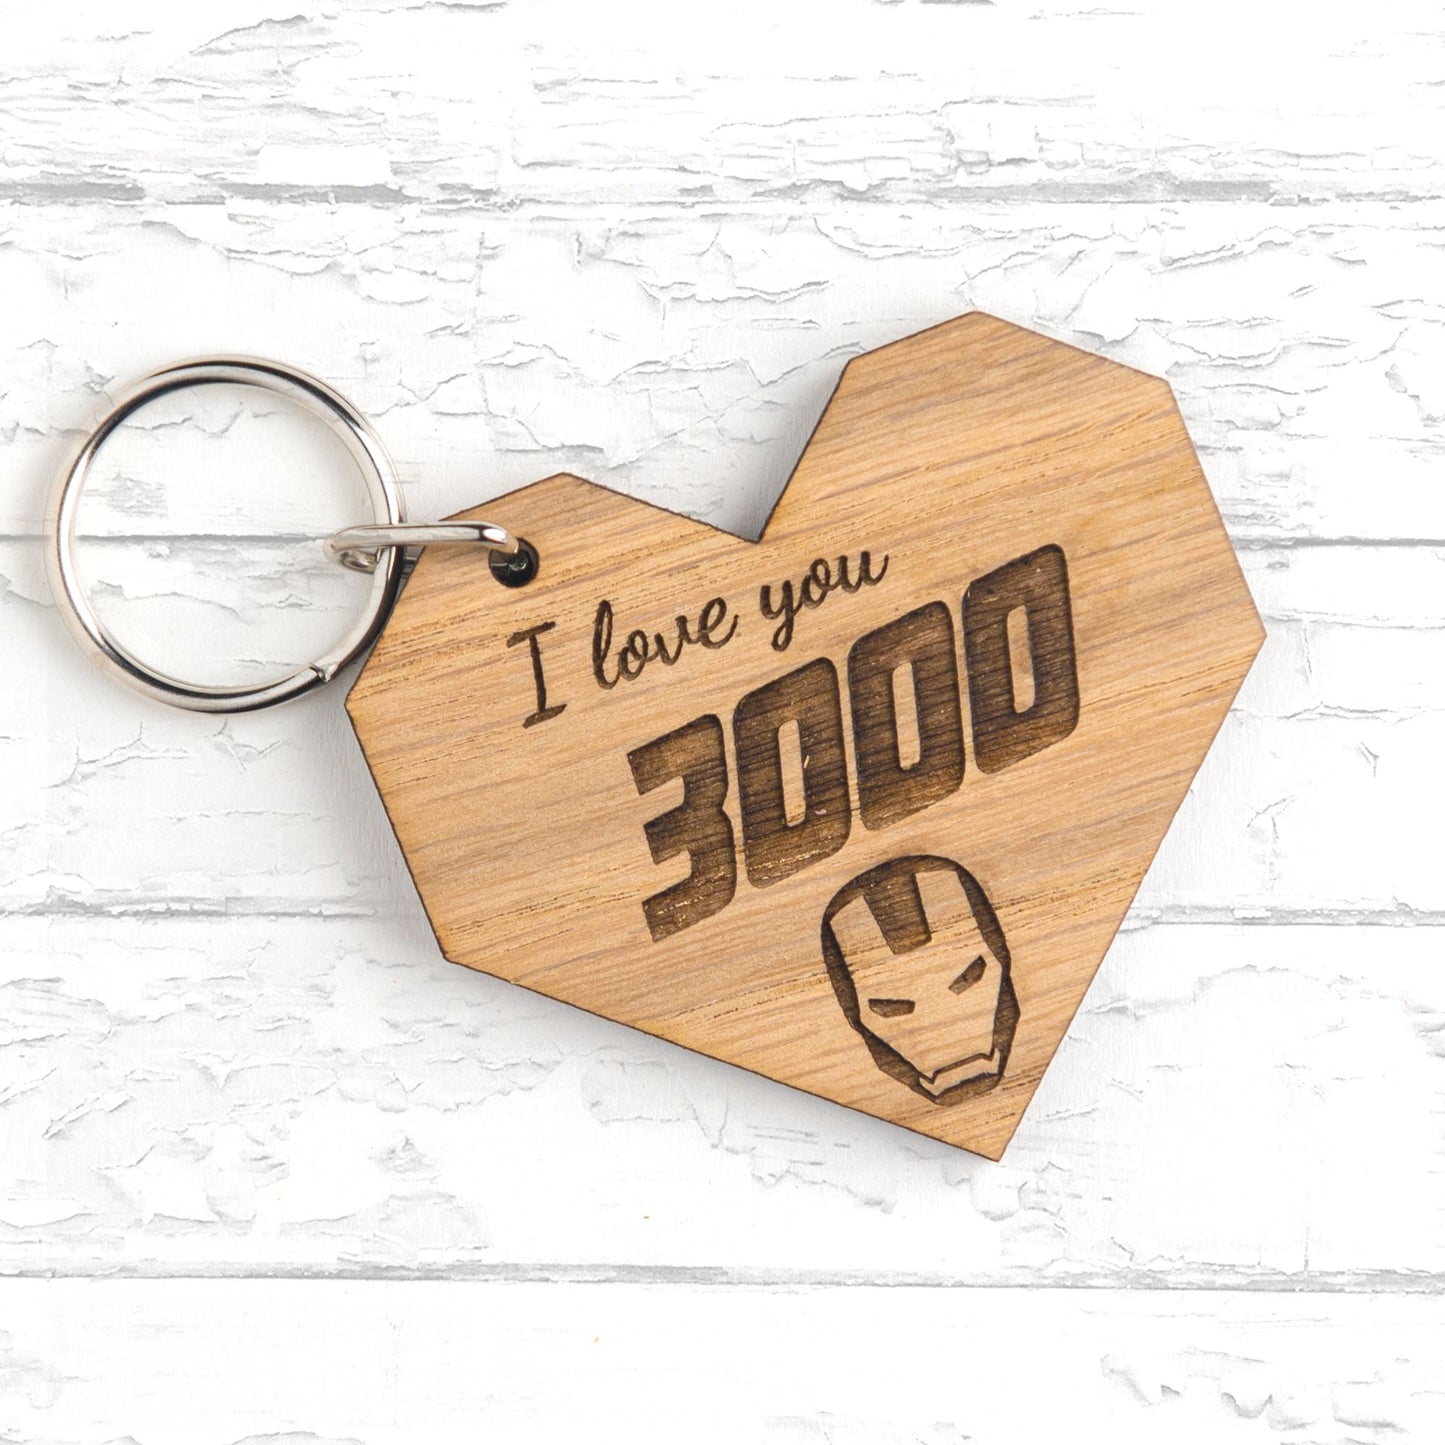 I Love You 3000 - The Avengers Iron Man Valentines Day Keyring Gift